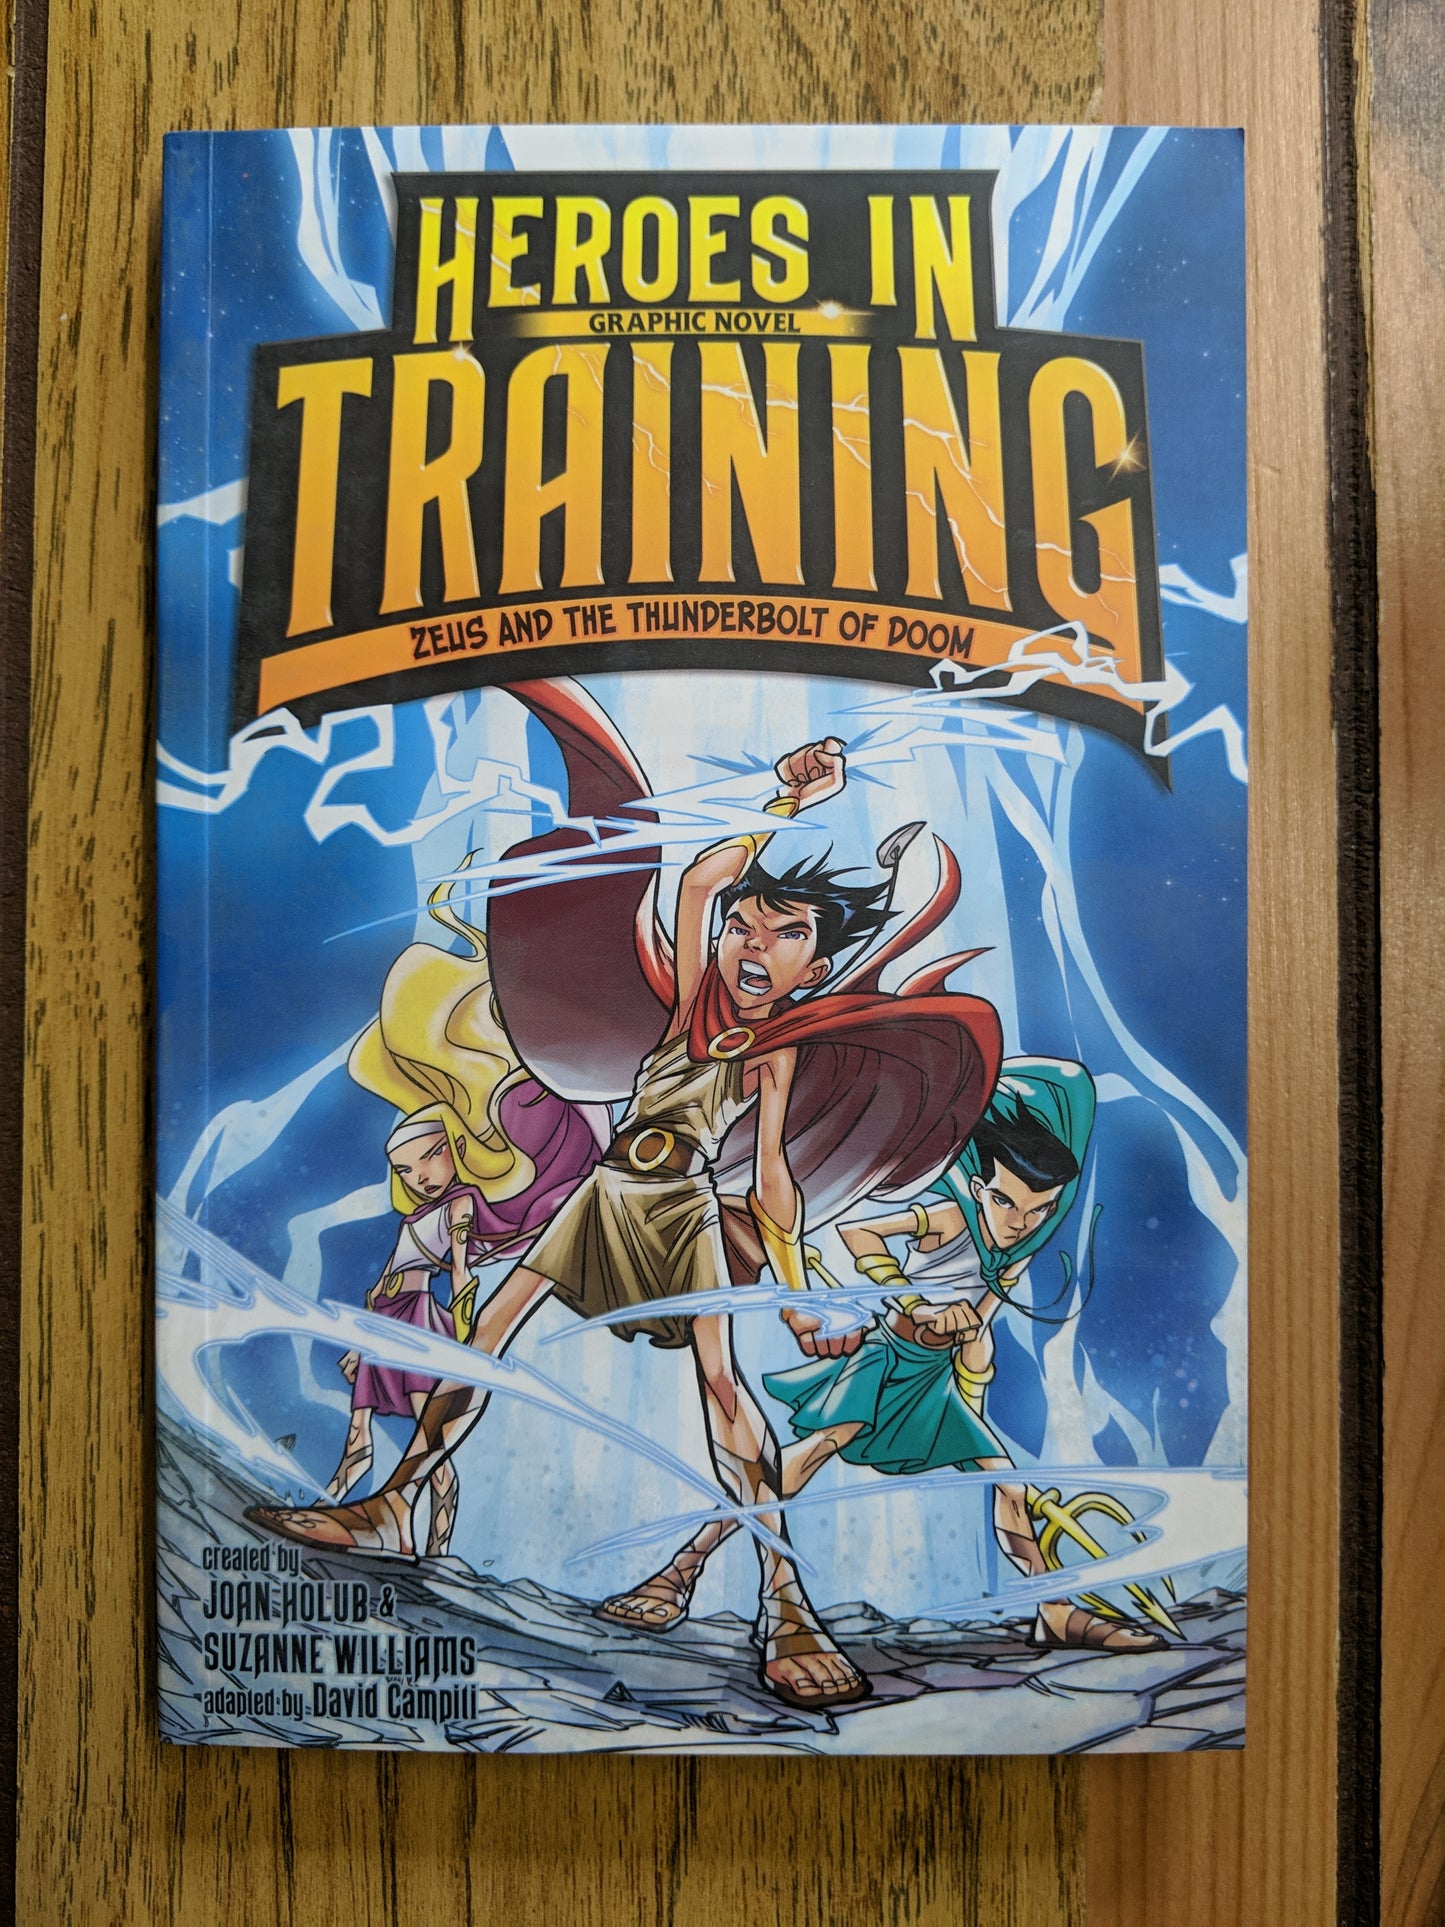 Heroes in Training: Zeus and the Thunderbolt of Doom (#1)